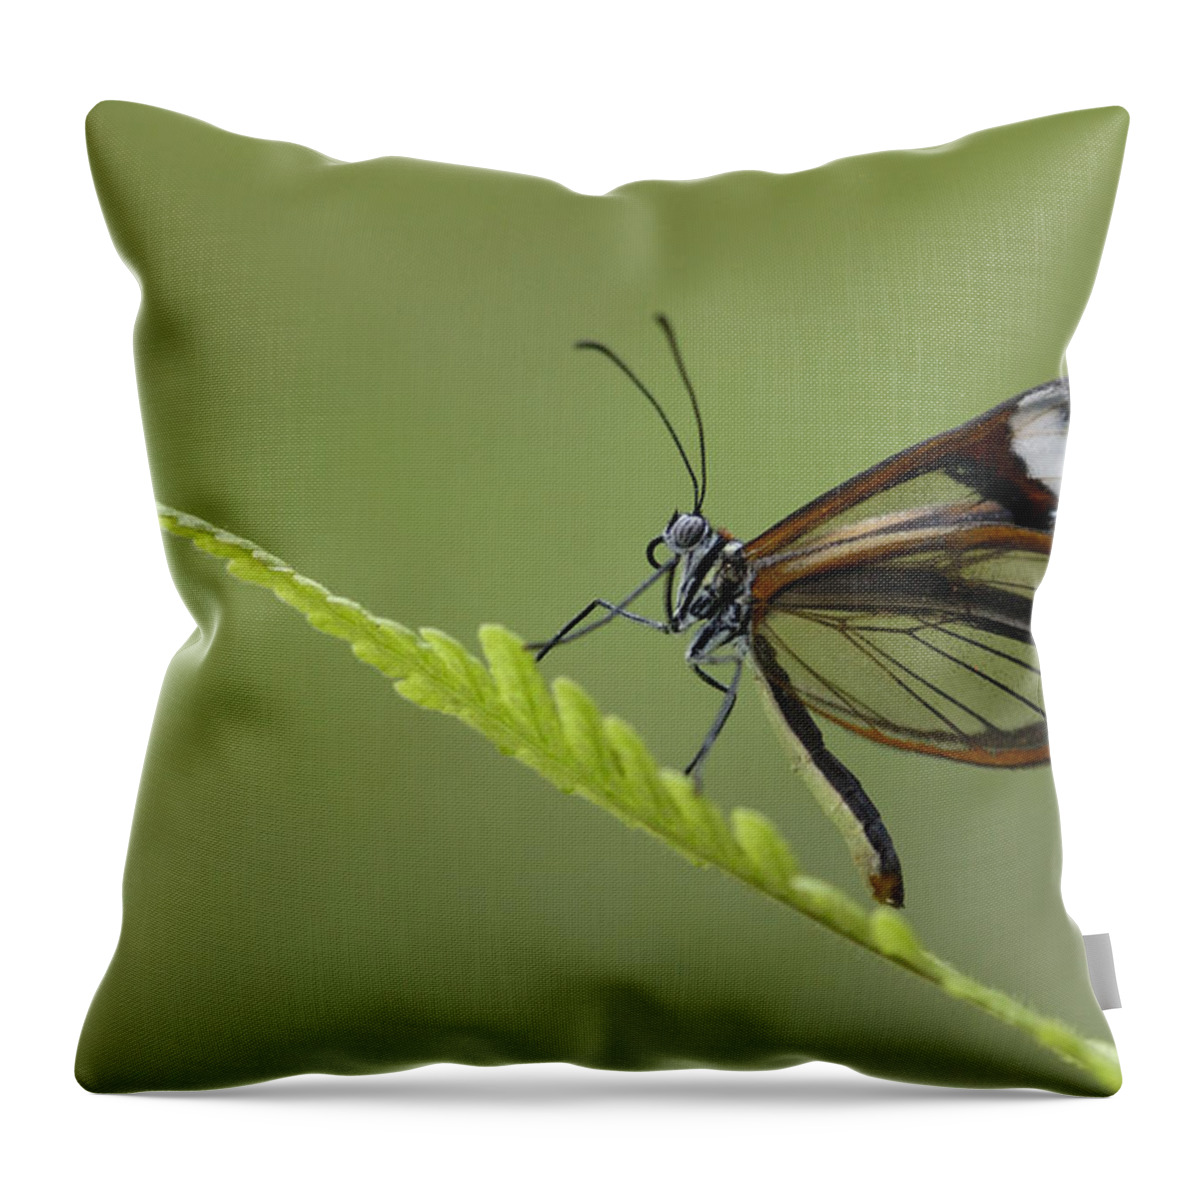 Feb0514 Throw Pillow featuring the photograph Nymphalid Butterfly Mindo Cloud Forest by Pete Oxford